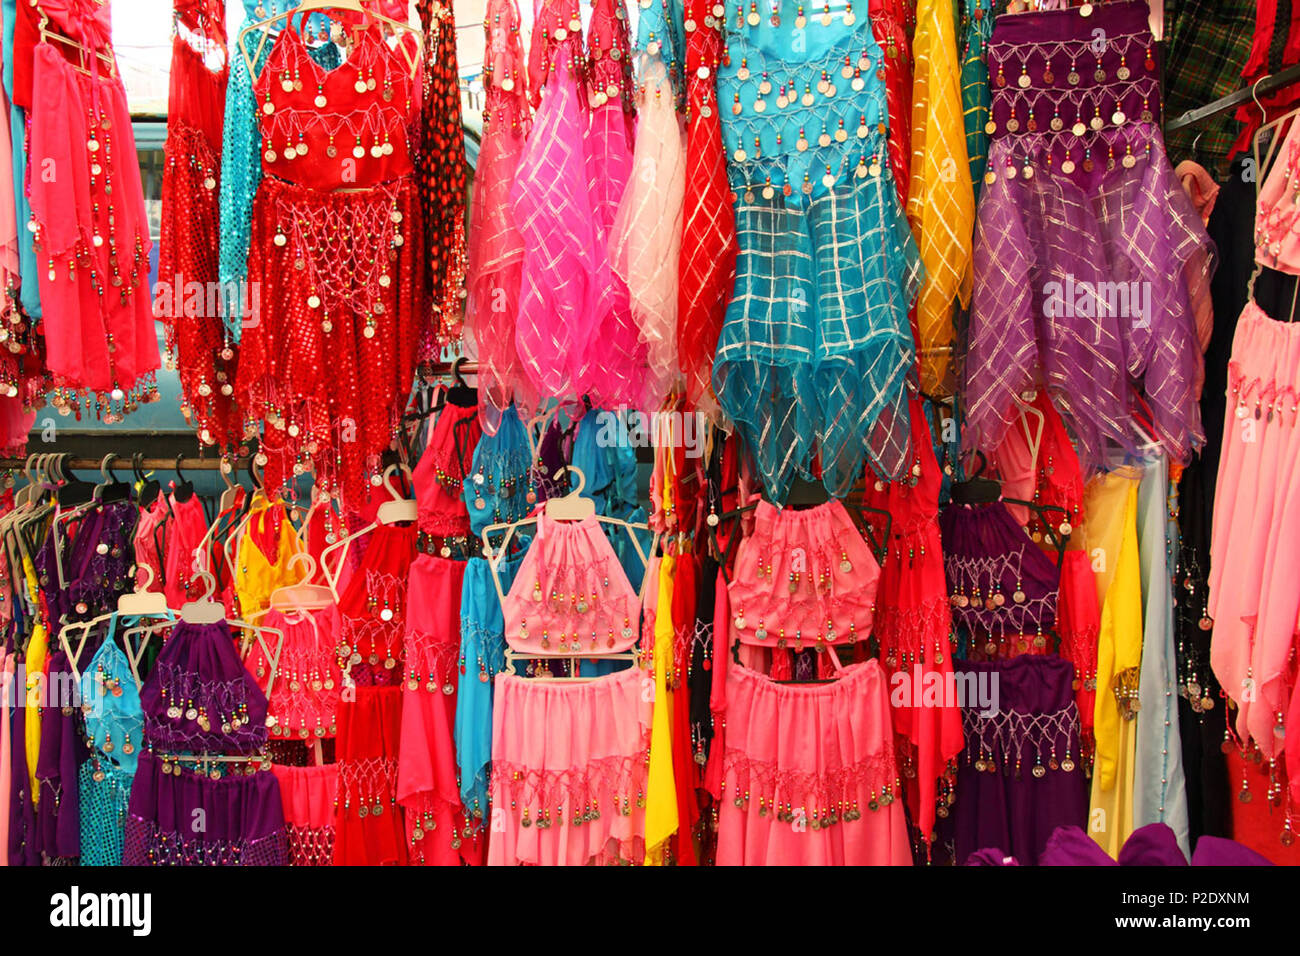 English: colorful dresses for belly dancers on local market in Fethiye -  Turkey . Vera Kratochvil 7 Belly-dancer-dresses Stock Photo - Alamy